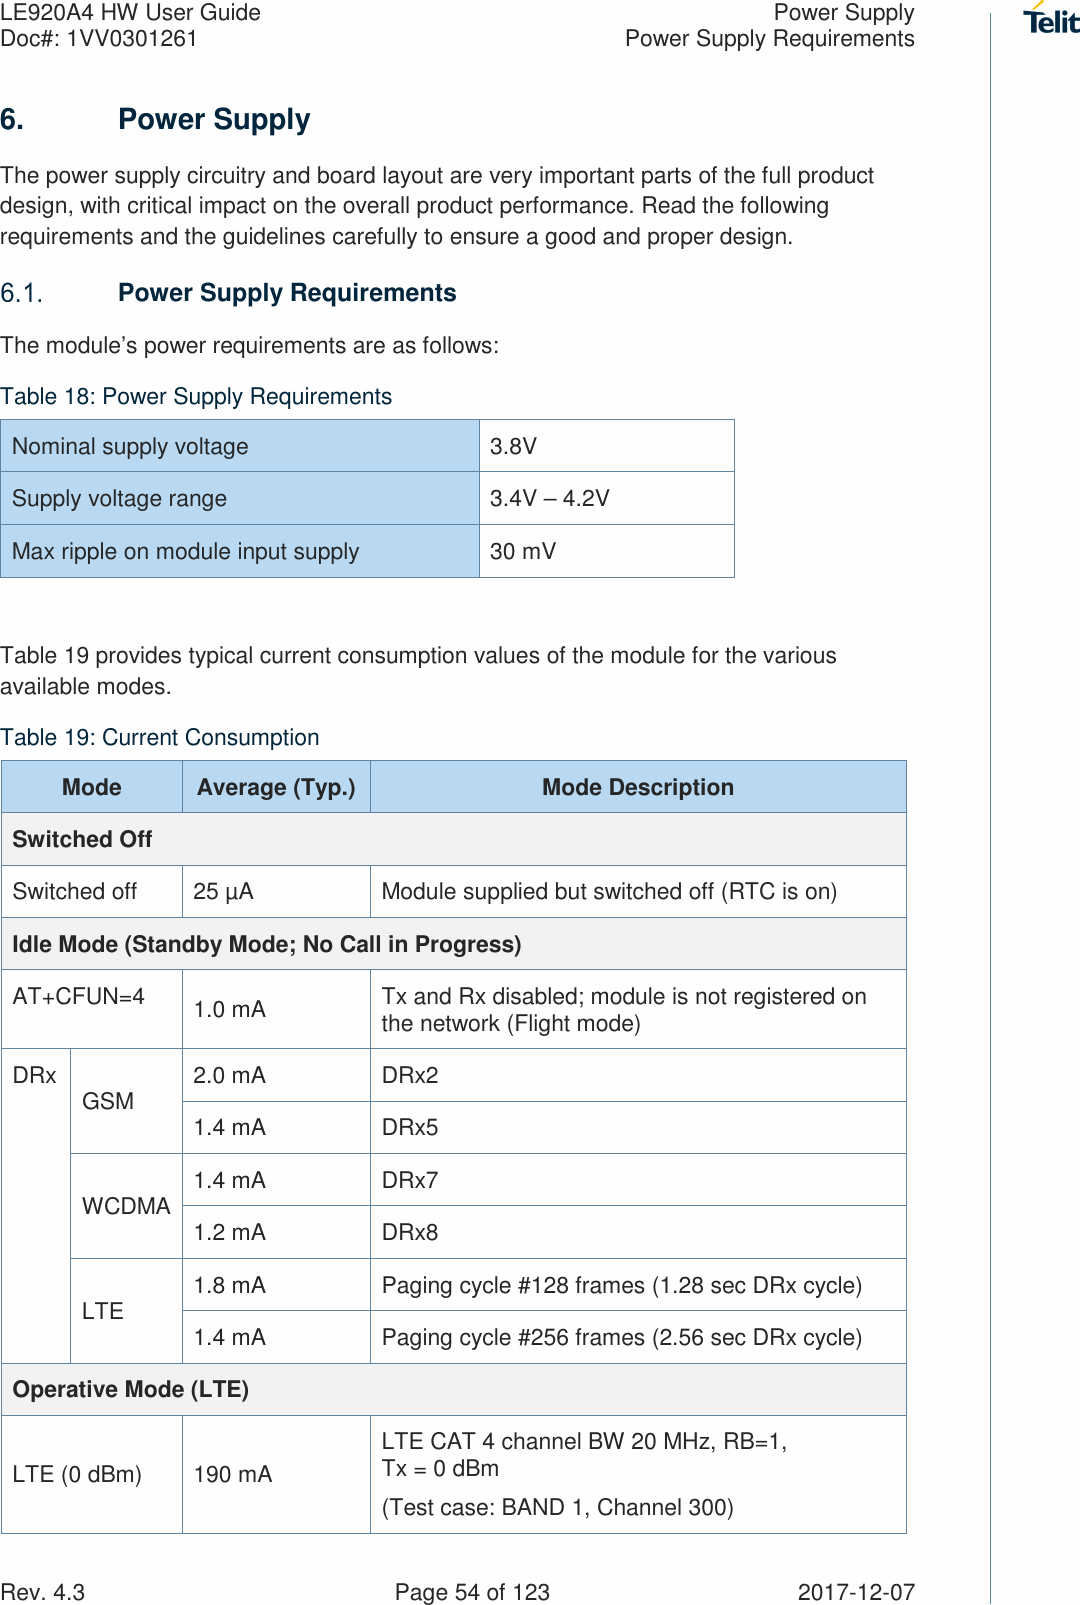 LE920A4 HW User Guide  Power Supply Doc#: 1VV0301261  Power Supply Requirements Rev. 4.3    Page 54 of 123  2017-12-07 6.  Power Supply The power supply circuitry and board layout are very important parts of the full product design, with critical impact on the overall product performance. Read the following requirements and the guidelines carefully to ensure a good and proper design.  Power Supply Requirements The module’s power requirements are as follows: Table 18: Power Supply Requirements Nominal supply voltage  3.8V Supply voltage range  3.4V – 4.2V Max ripple on module input supply  30 mV  Table 19 provides typical current consumption values of the module for the various available modes. Table 19: Current Consumption Mode  Average (Typ.)  Mode Description Switched Off Switched off  25 µA  Module supplied but switched off (RTC is on) Idle Mode (Standby Mode; No Call in Progress) AT+CFUN=4  1.0 mA  Tx and Rx disabled; module is not registered on the network (Flight mode)  DRx  GSM  2.0 mA  DRx2 1.4 mA  DRx5 WCDMA 1.4 mA  DRx7 1.2 mA  DRx8 LTE  1.8 mA  Paging cycle #128 frames (1.28 sec DRx cycle) 1.4 mA  Paging cycle #256 frames (2.56 sec DRx cycle) Operative Mode (LTE) LTE (0 dBm)  190 mA LTE CAT 4 channel BW 20 MHz, RB=1, Tx = 0 dBm  (Test case: BAND 1, Channel 300) 